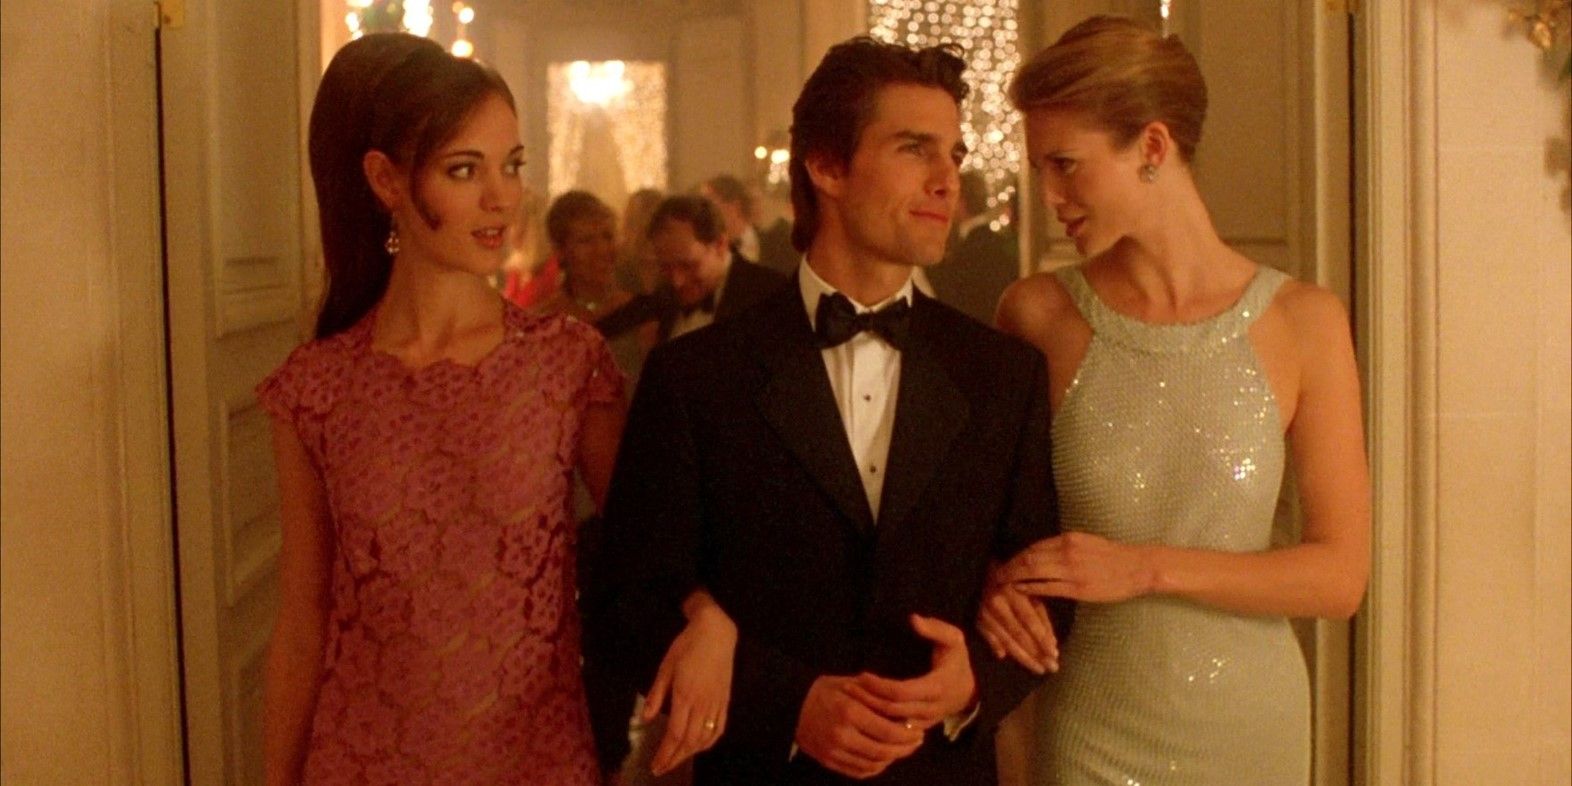 7 Actors That Kubrick Wanted to Cast as the Lead in 'Eyes Wide Shut'